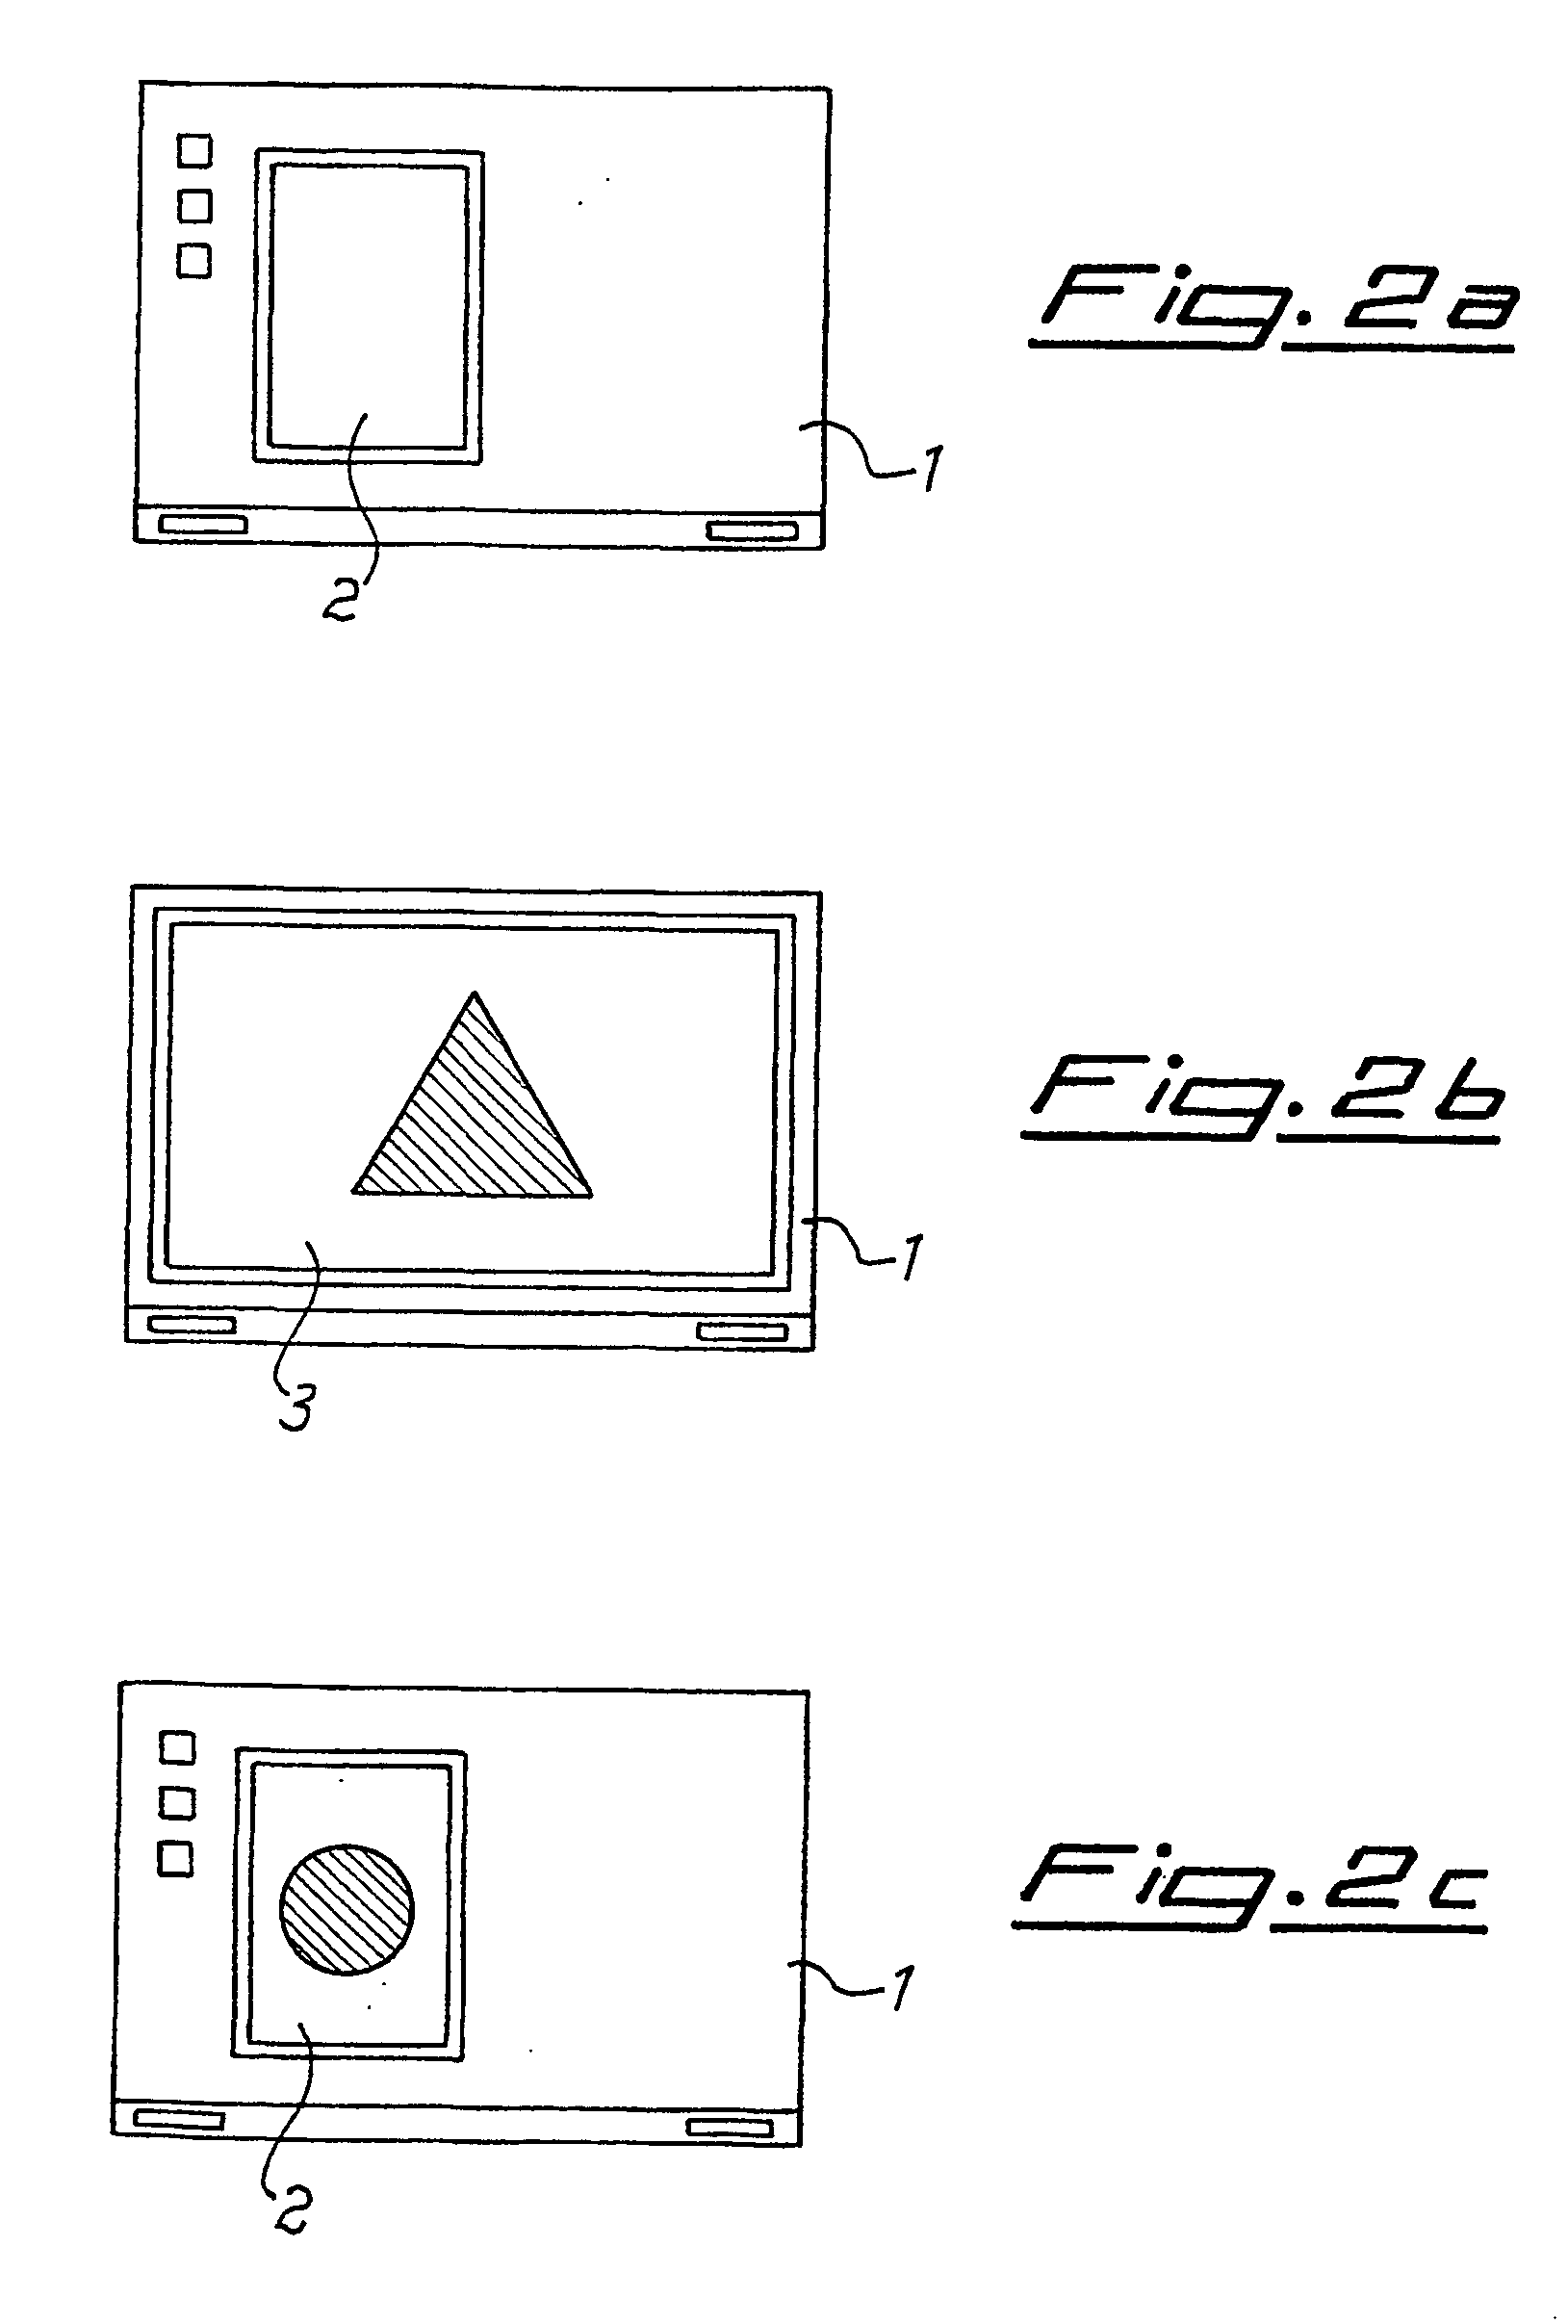 Method for delivering data or code segments to a local computer in a distributed computer network